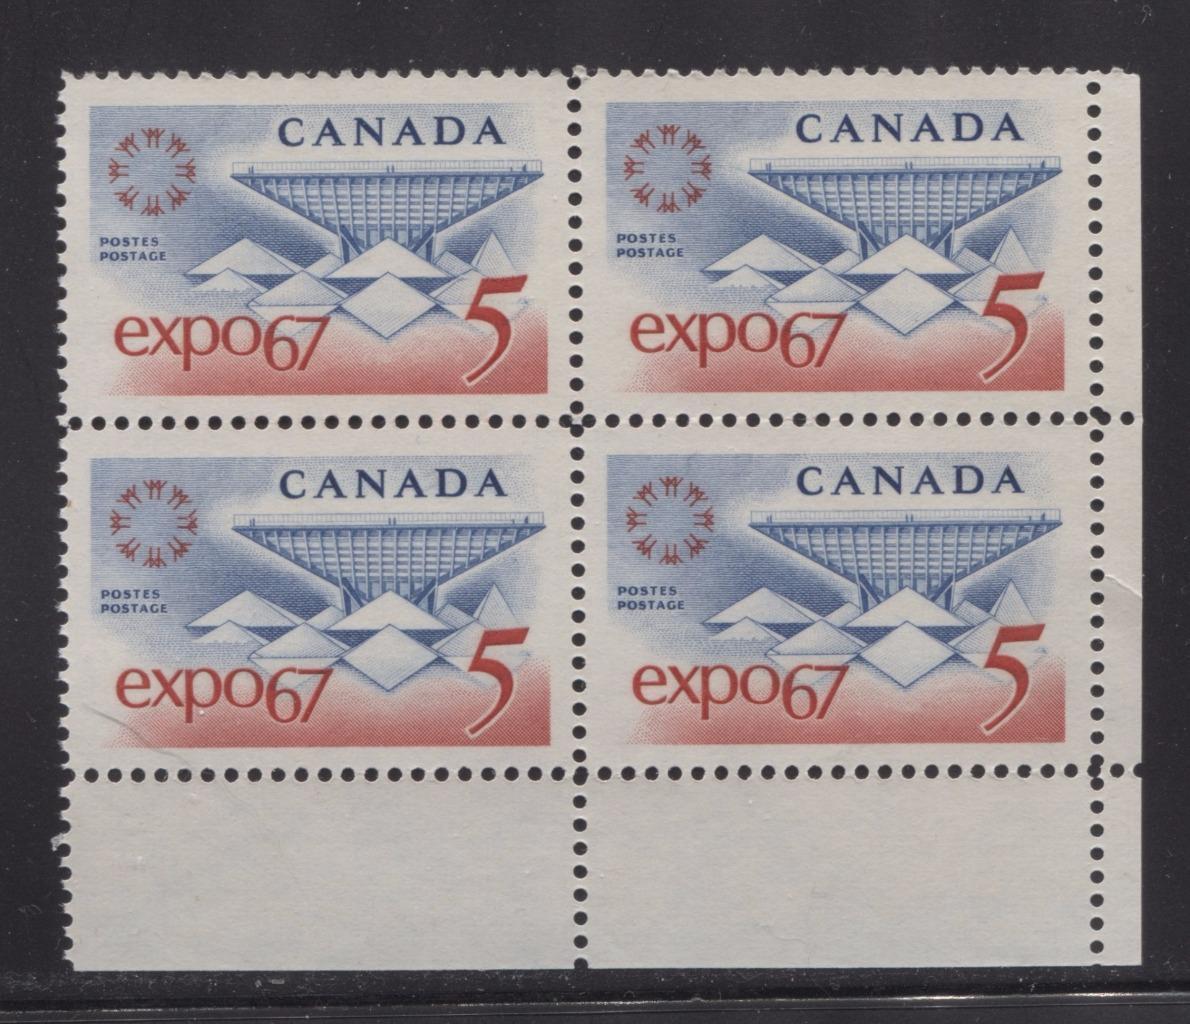 Canada #469 (SG#611) 5c Blue and Red Expo 67 DF-fl BW, LF, VF Ribbed Paper LR Block VF-84 NH Brixton Chrome 